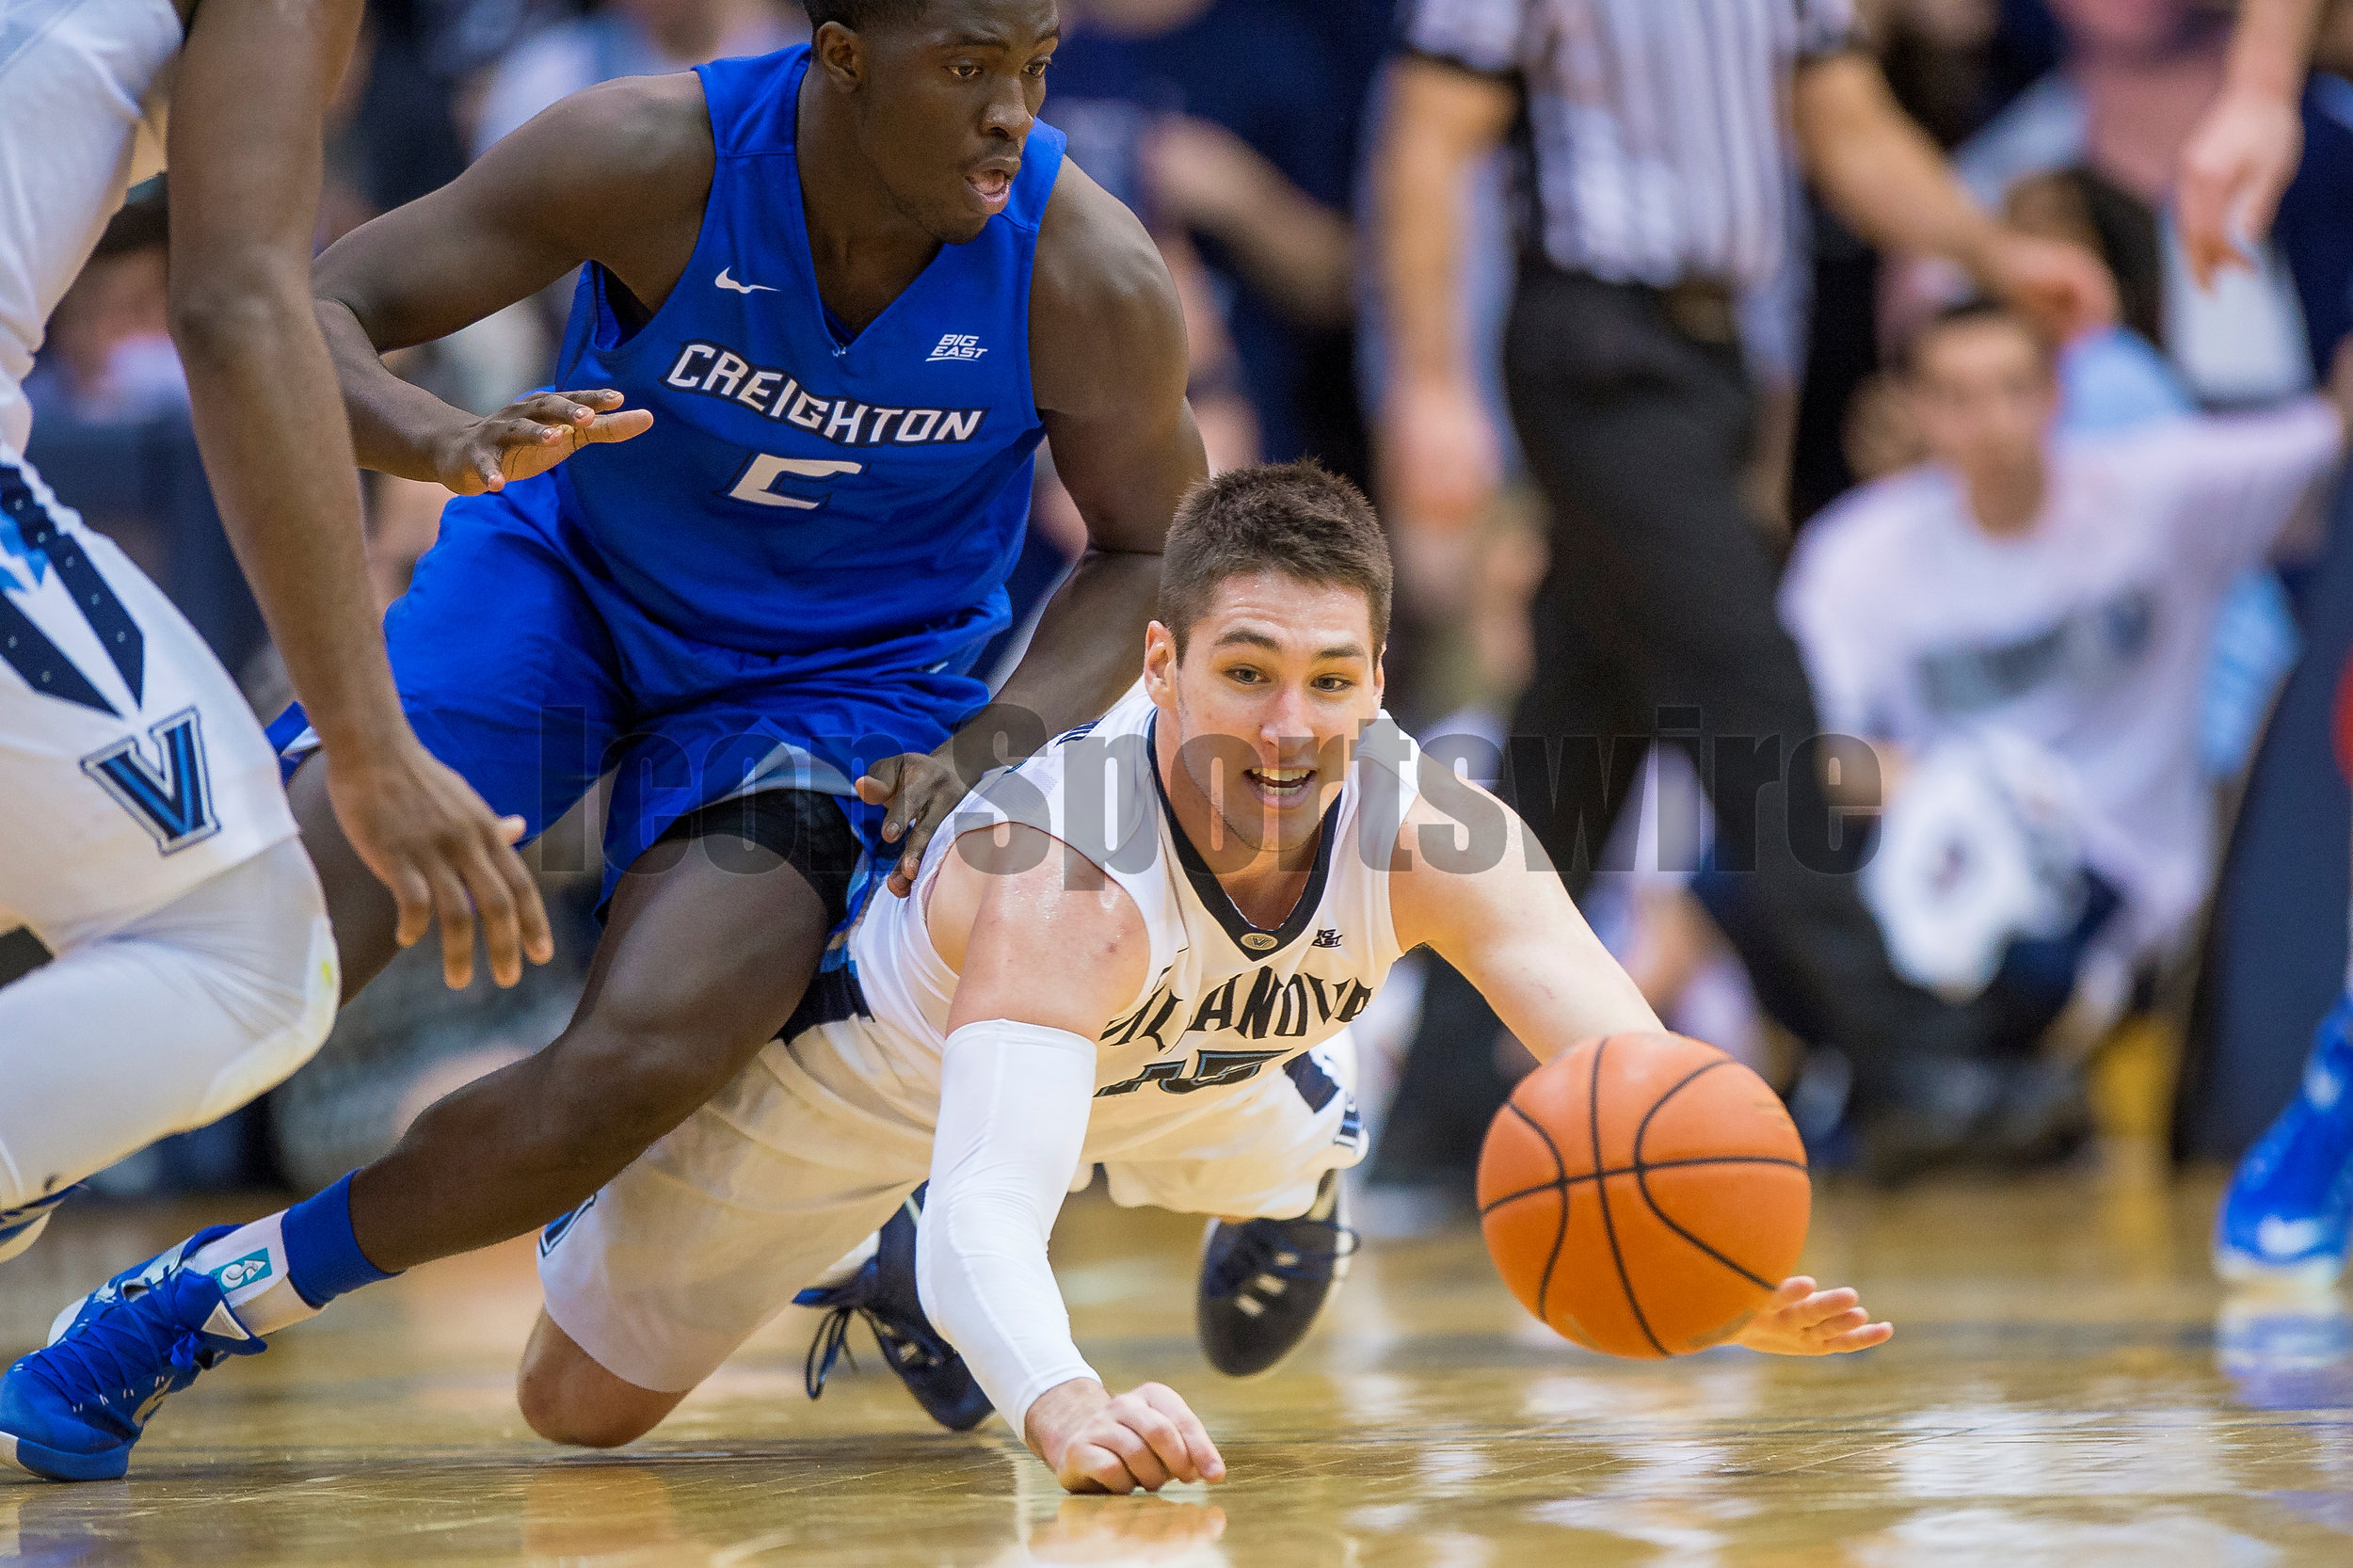  03 February 2016: Villanova Wildcats guard Ryan Arcidiacono (15) dives after the loose ball during the NCAA Baksetball game between the Villanova Wildcats and the Creighton Bluejays played at the Pavilion in Villanova, PA. (Photo by Gavin Baker/Icon